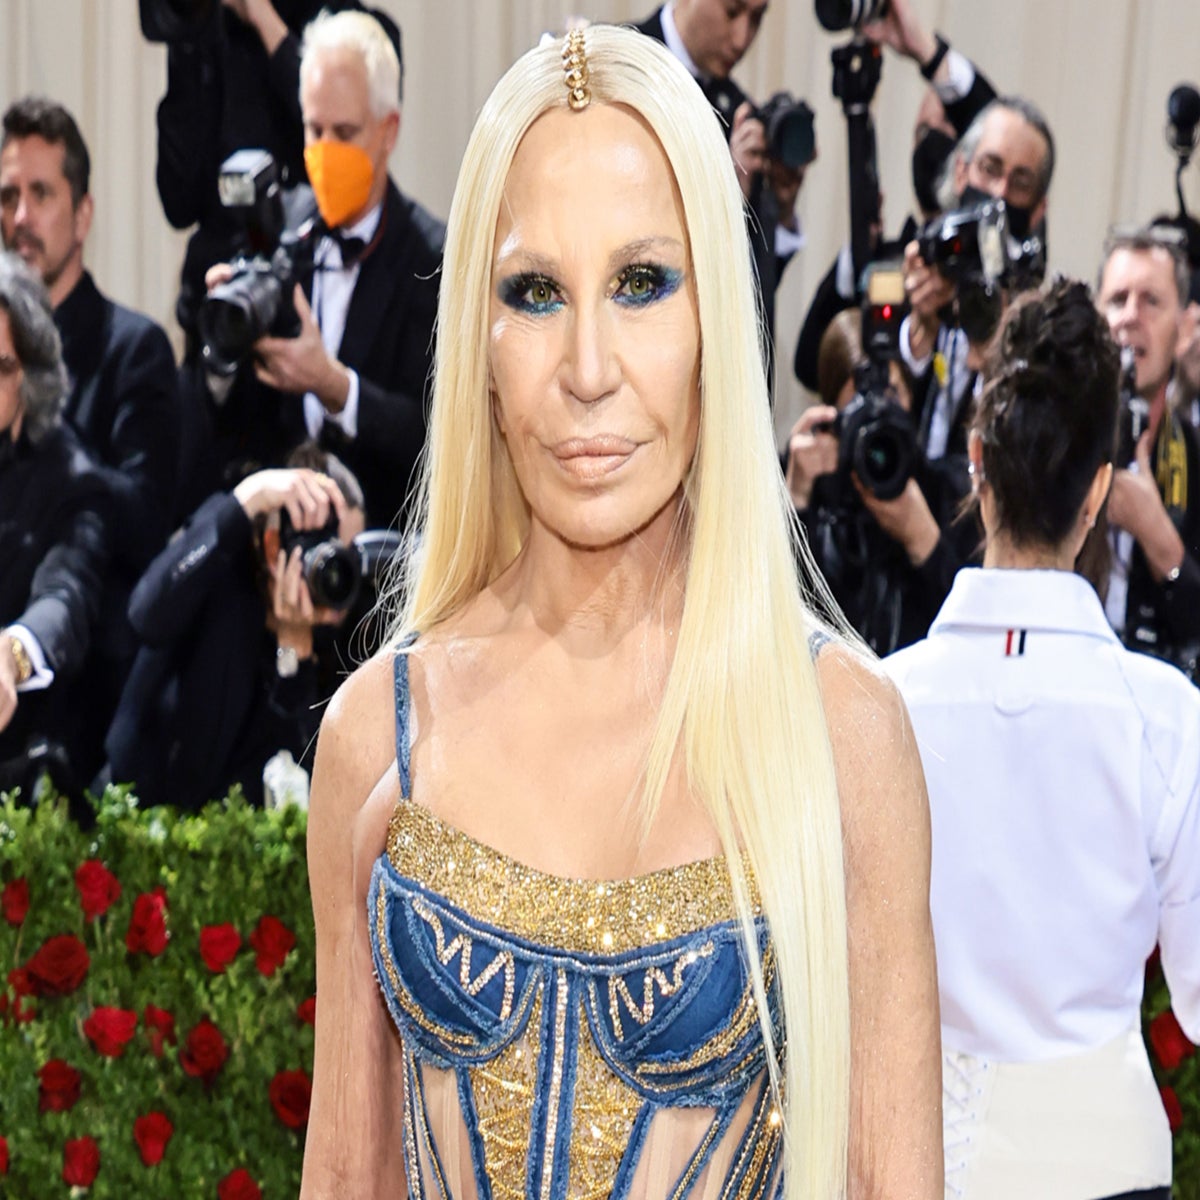 Versace: 20 years after her brother's death, Donatella combines